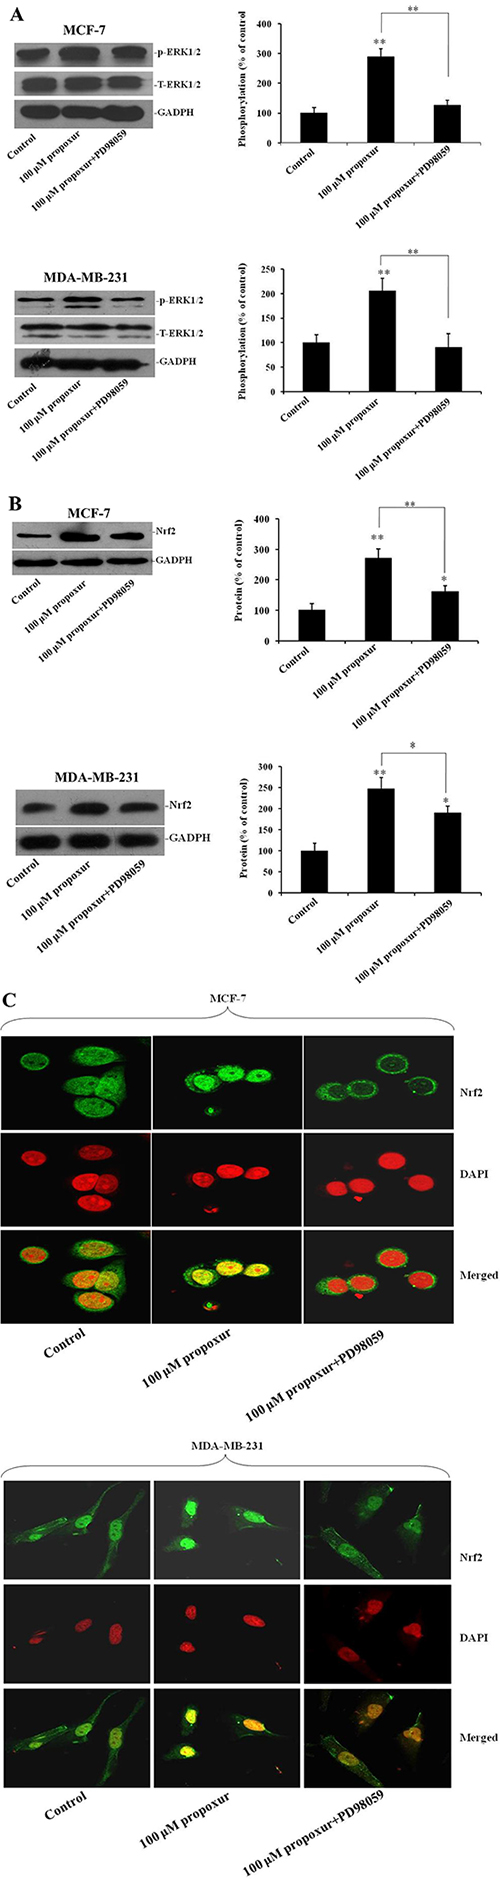 Inhibiting ERK1/2 activation by PD98059 suppresses the expression and translocation of Nrf2 protein.